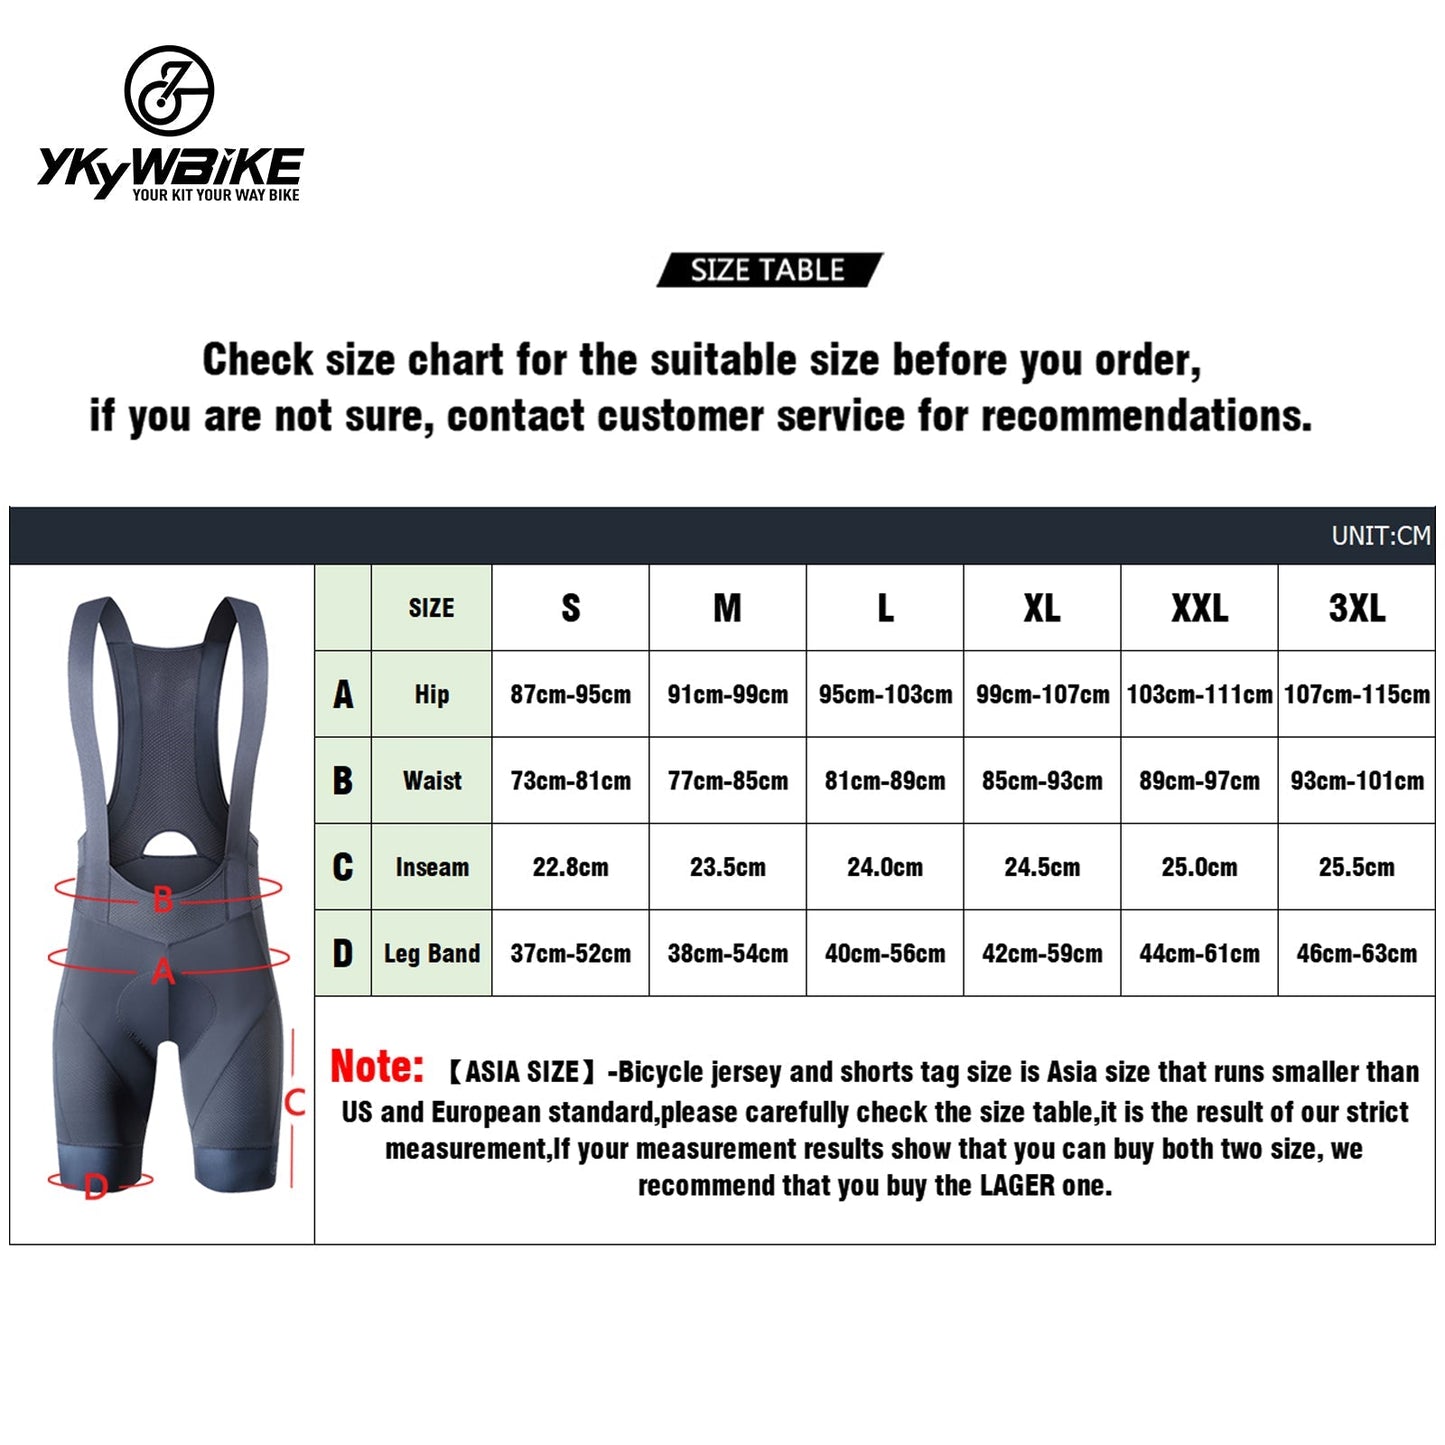 YKYW 2024 Men’s Cycling Set Moisture Wicking Quick Dry Multiple ColorJersey and 5H Padded Tights Color Bib Shorts 6 Combinations